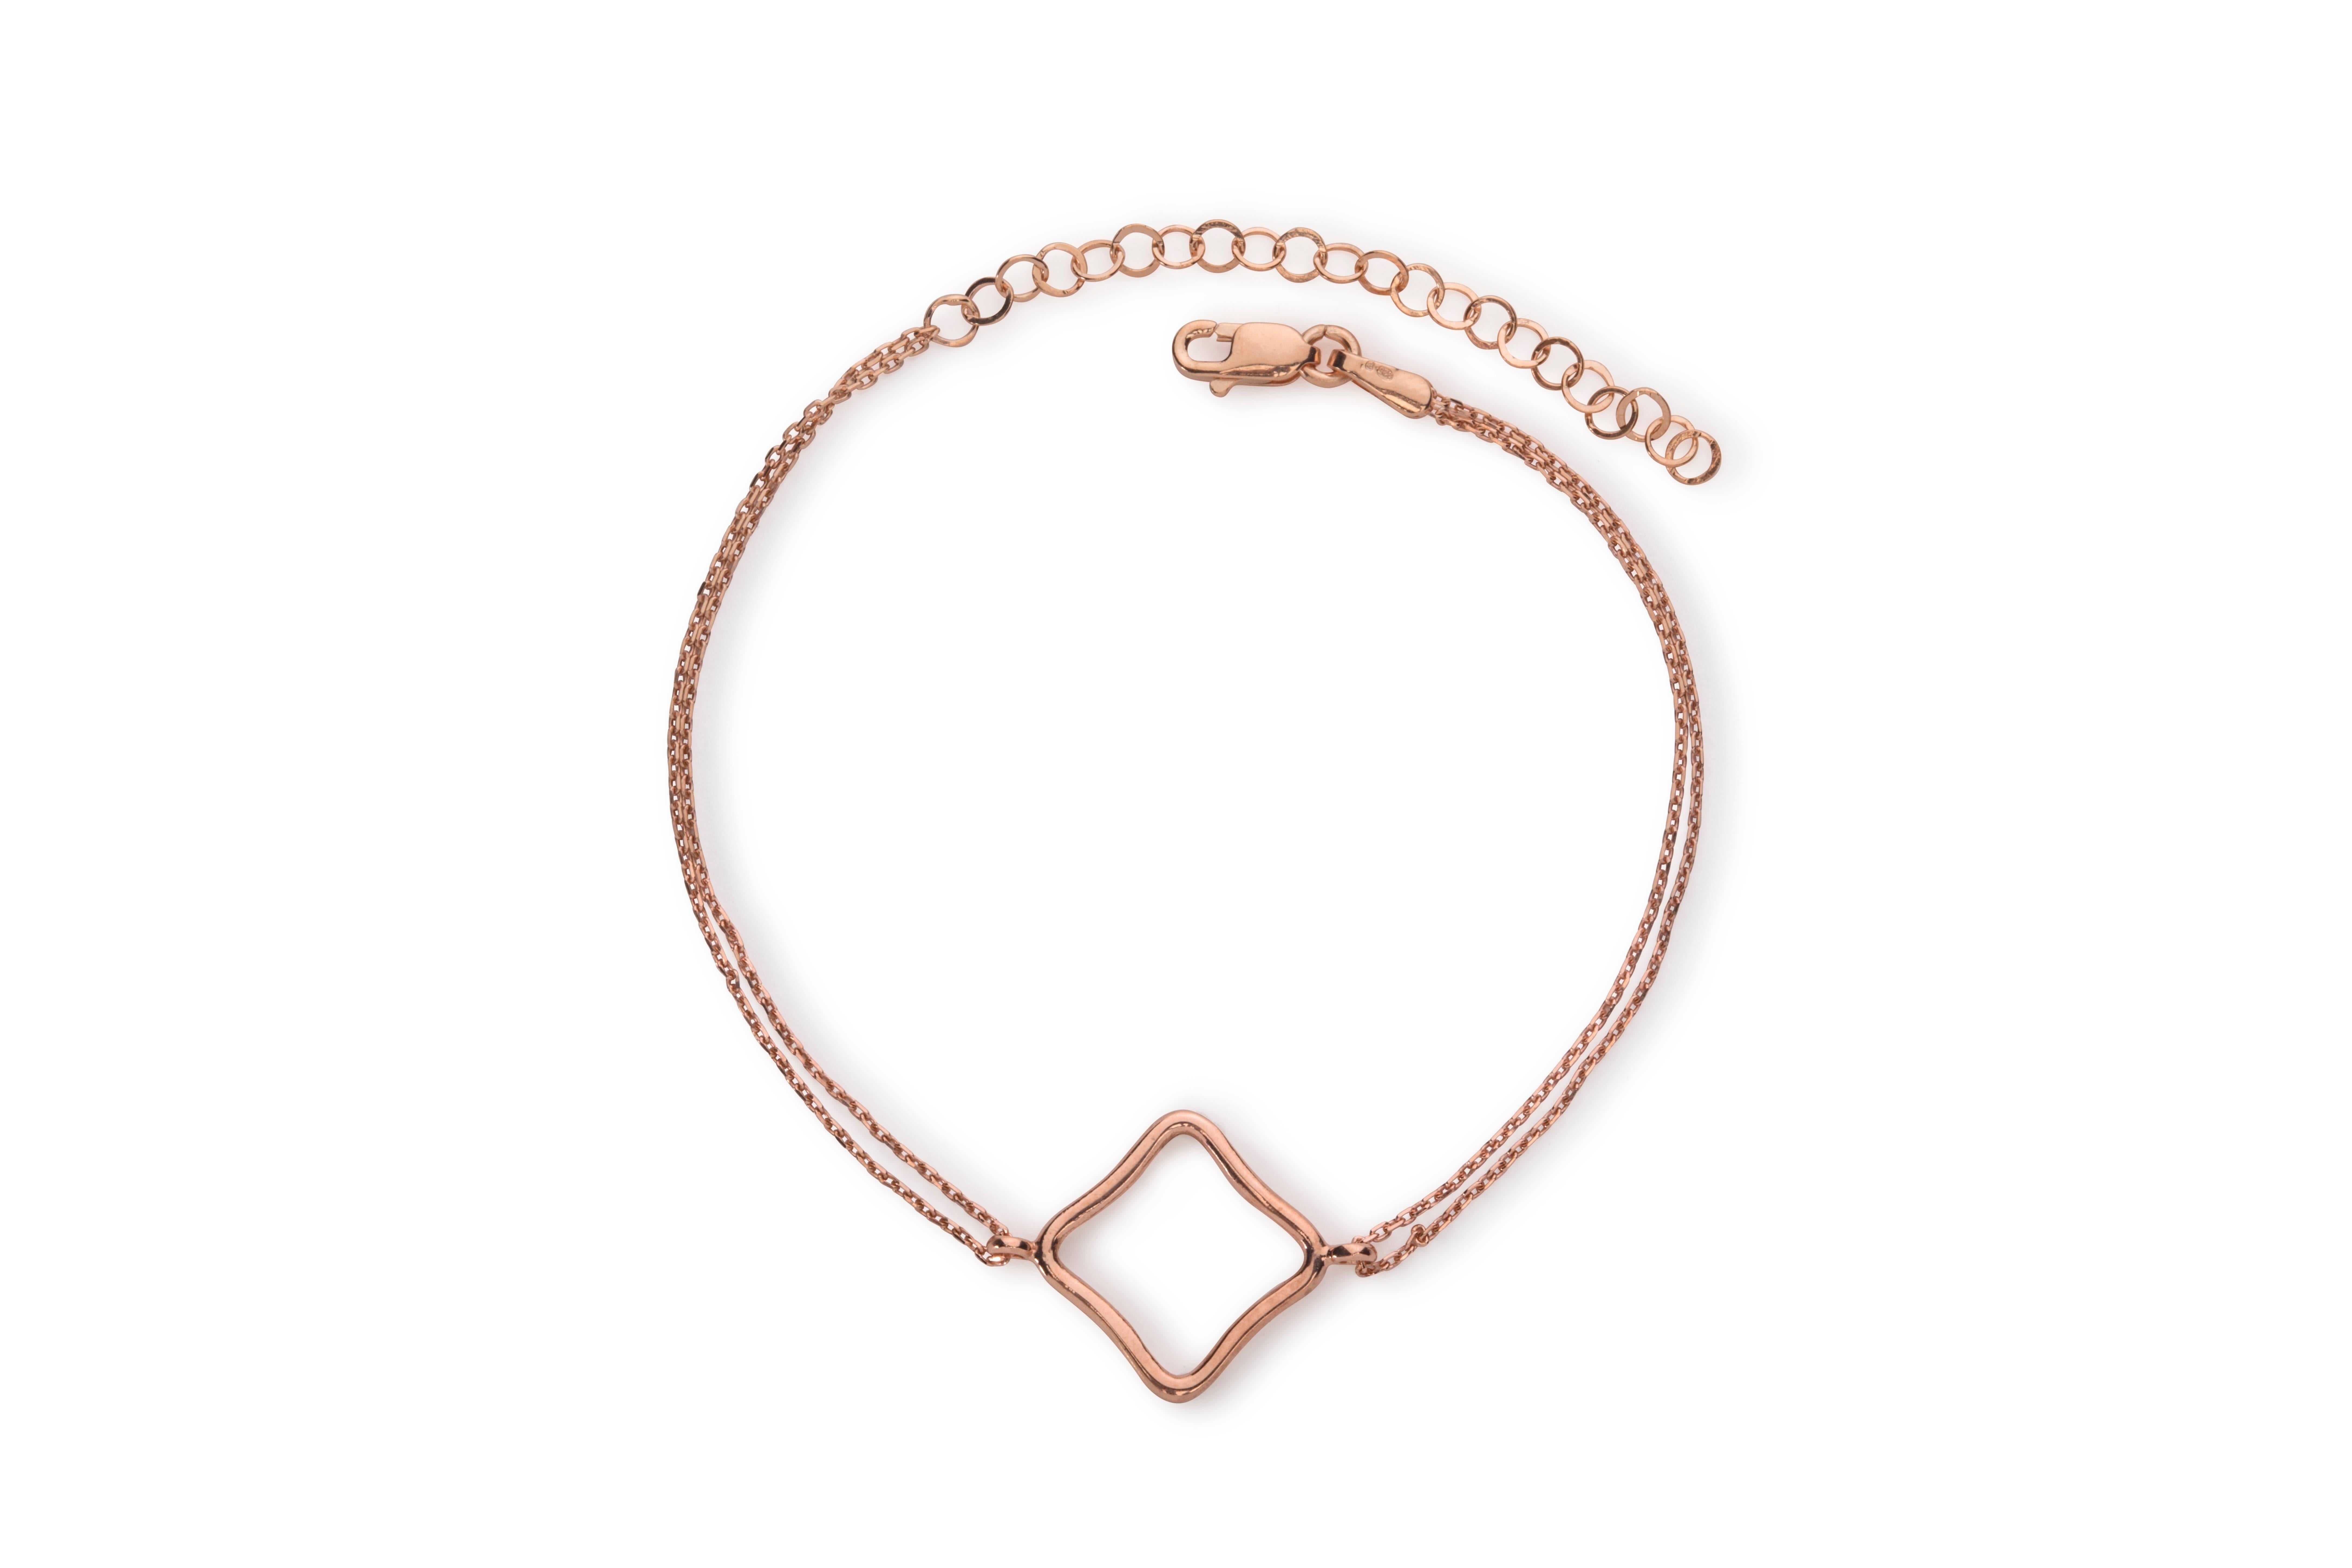 These bracelets are a great size as they are big enough to be worn on their own or layered – a great, classic look. Layer with our other Bodrum bracelets in different gold finishes and sizes, and match them with our fantastic Bodrum necklaces. This